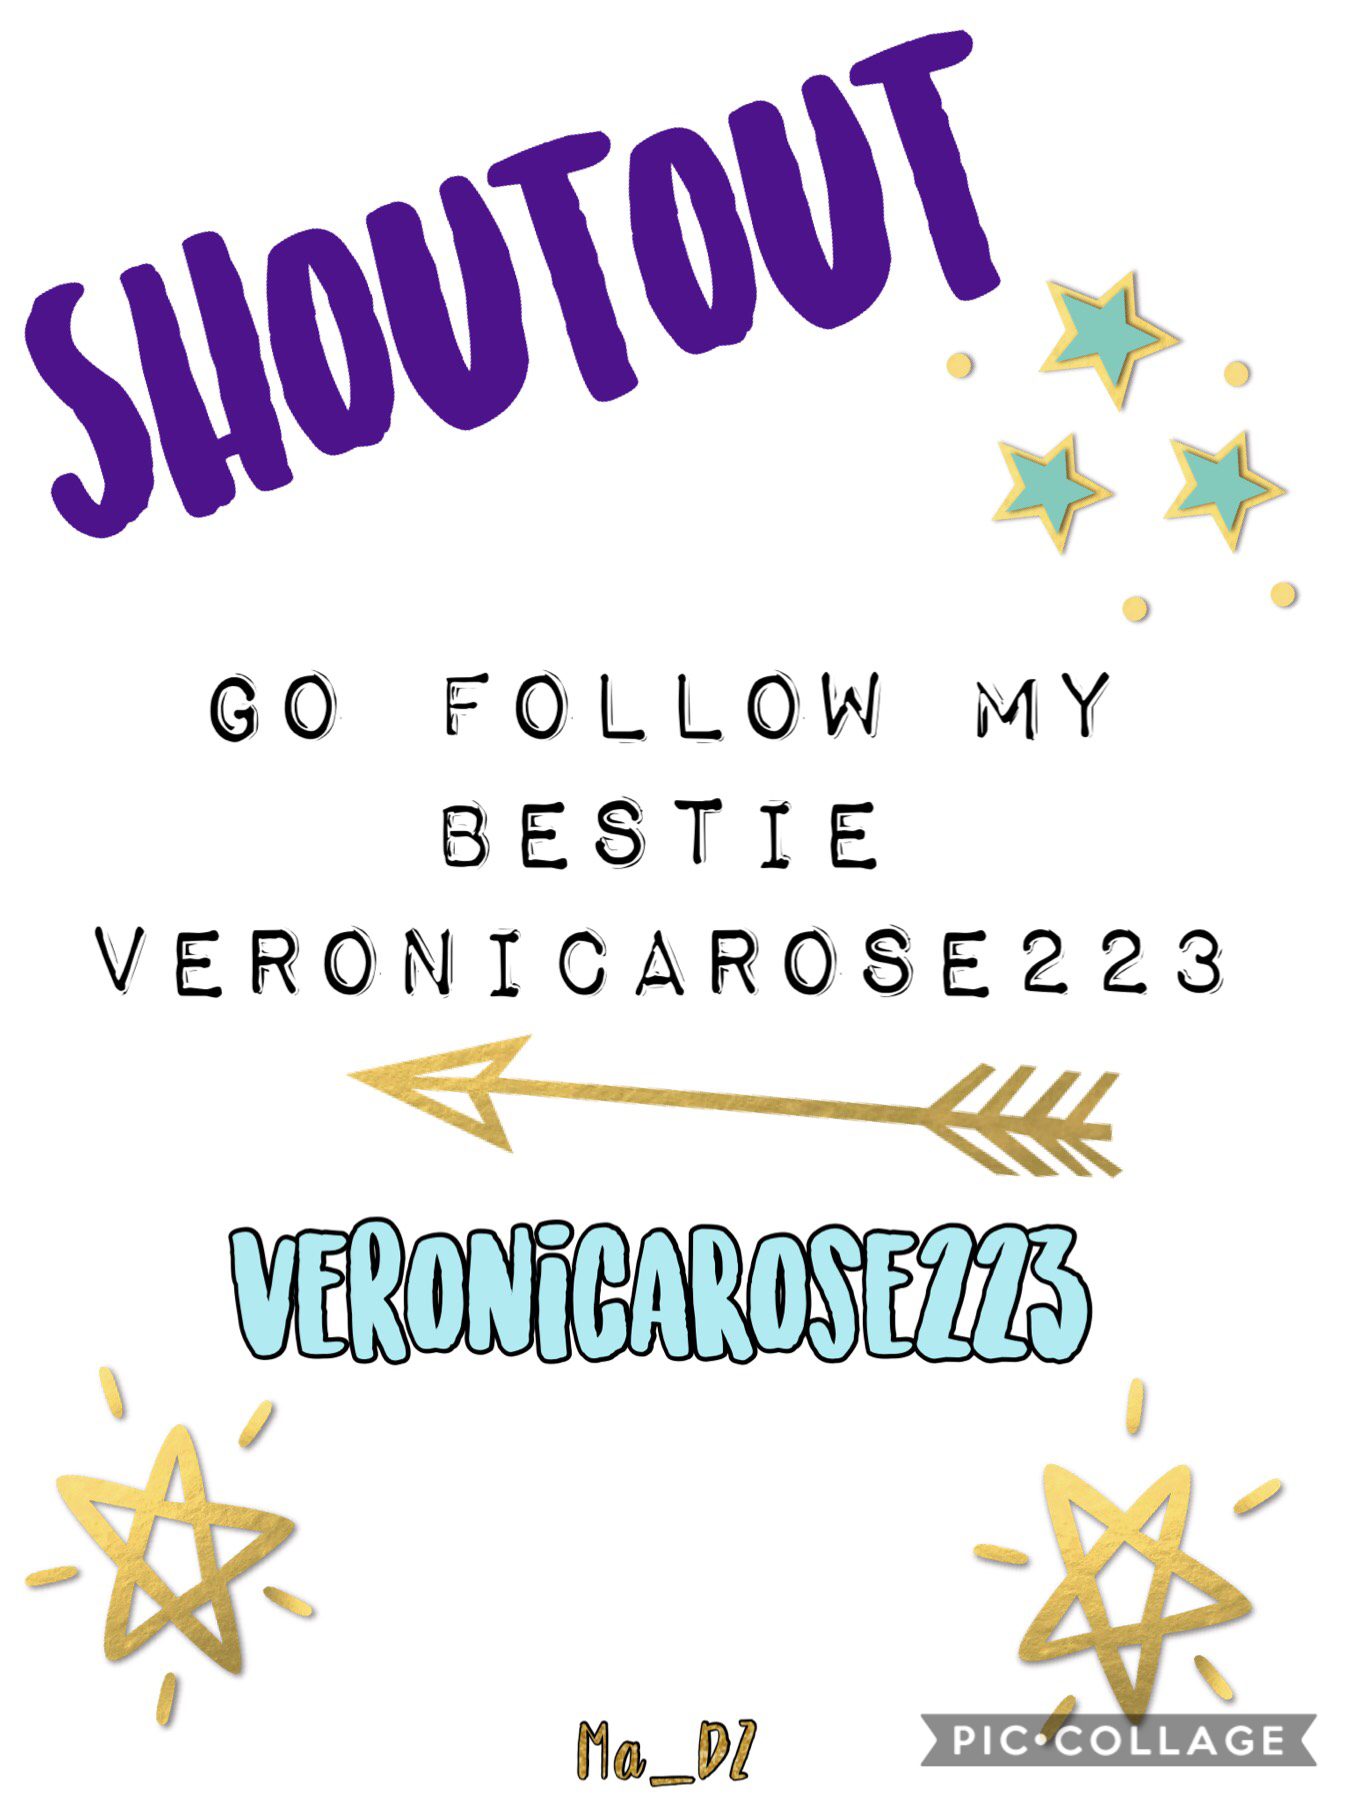 Go follow VeronicaRose223 on pic collage (this app). She is a good friend of mine. Herself and I would appreciate if you follow her.